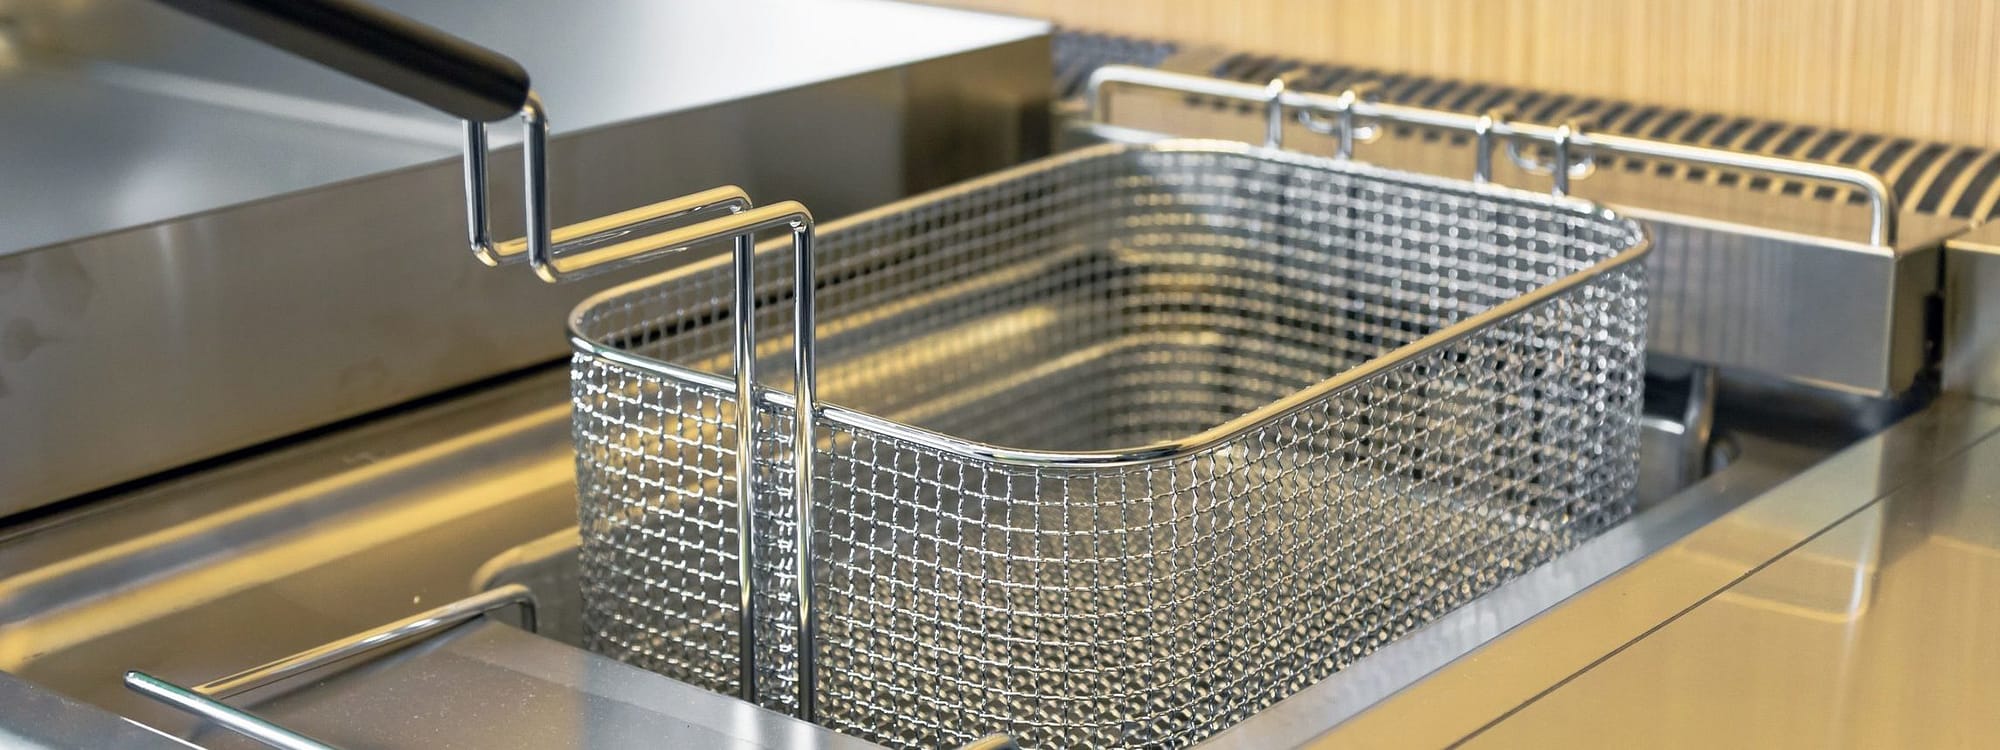 How To Clean a Deep Fat Fryer- 17 Steps